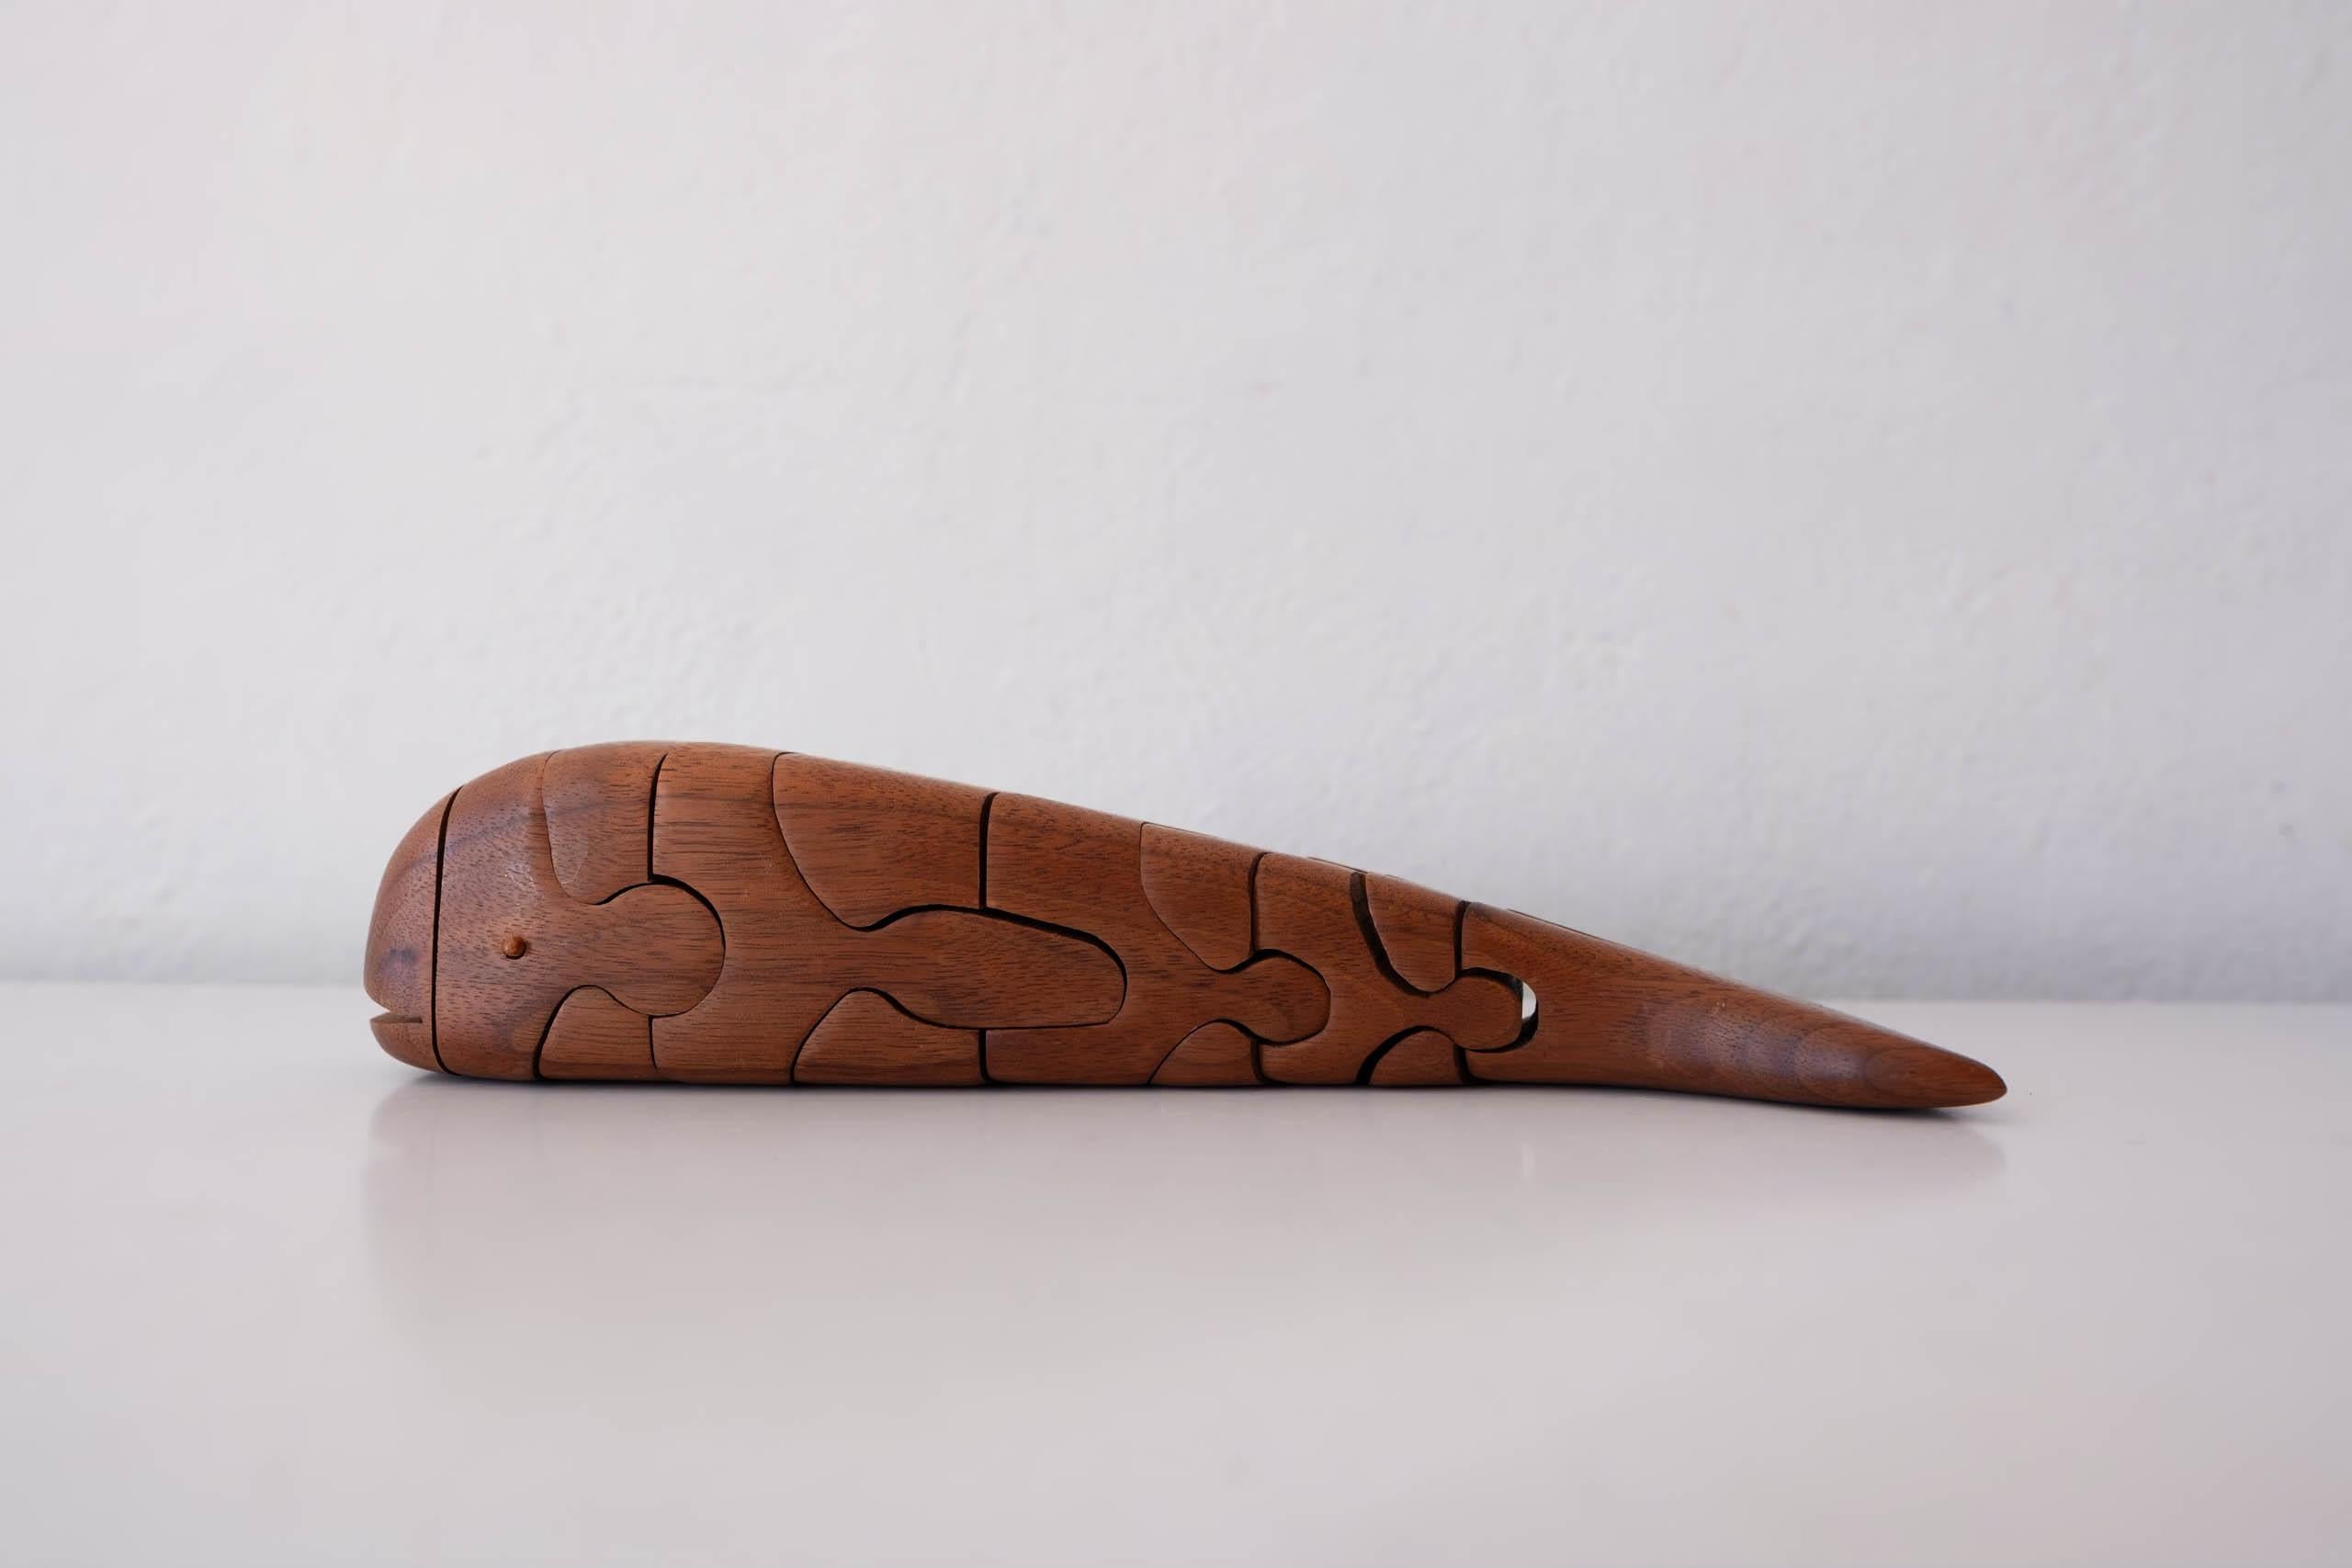 American Handcrafted Wood Whale Puzzle Sculpture Signed For Sale